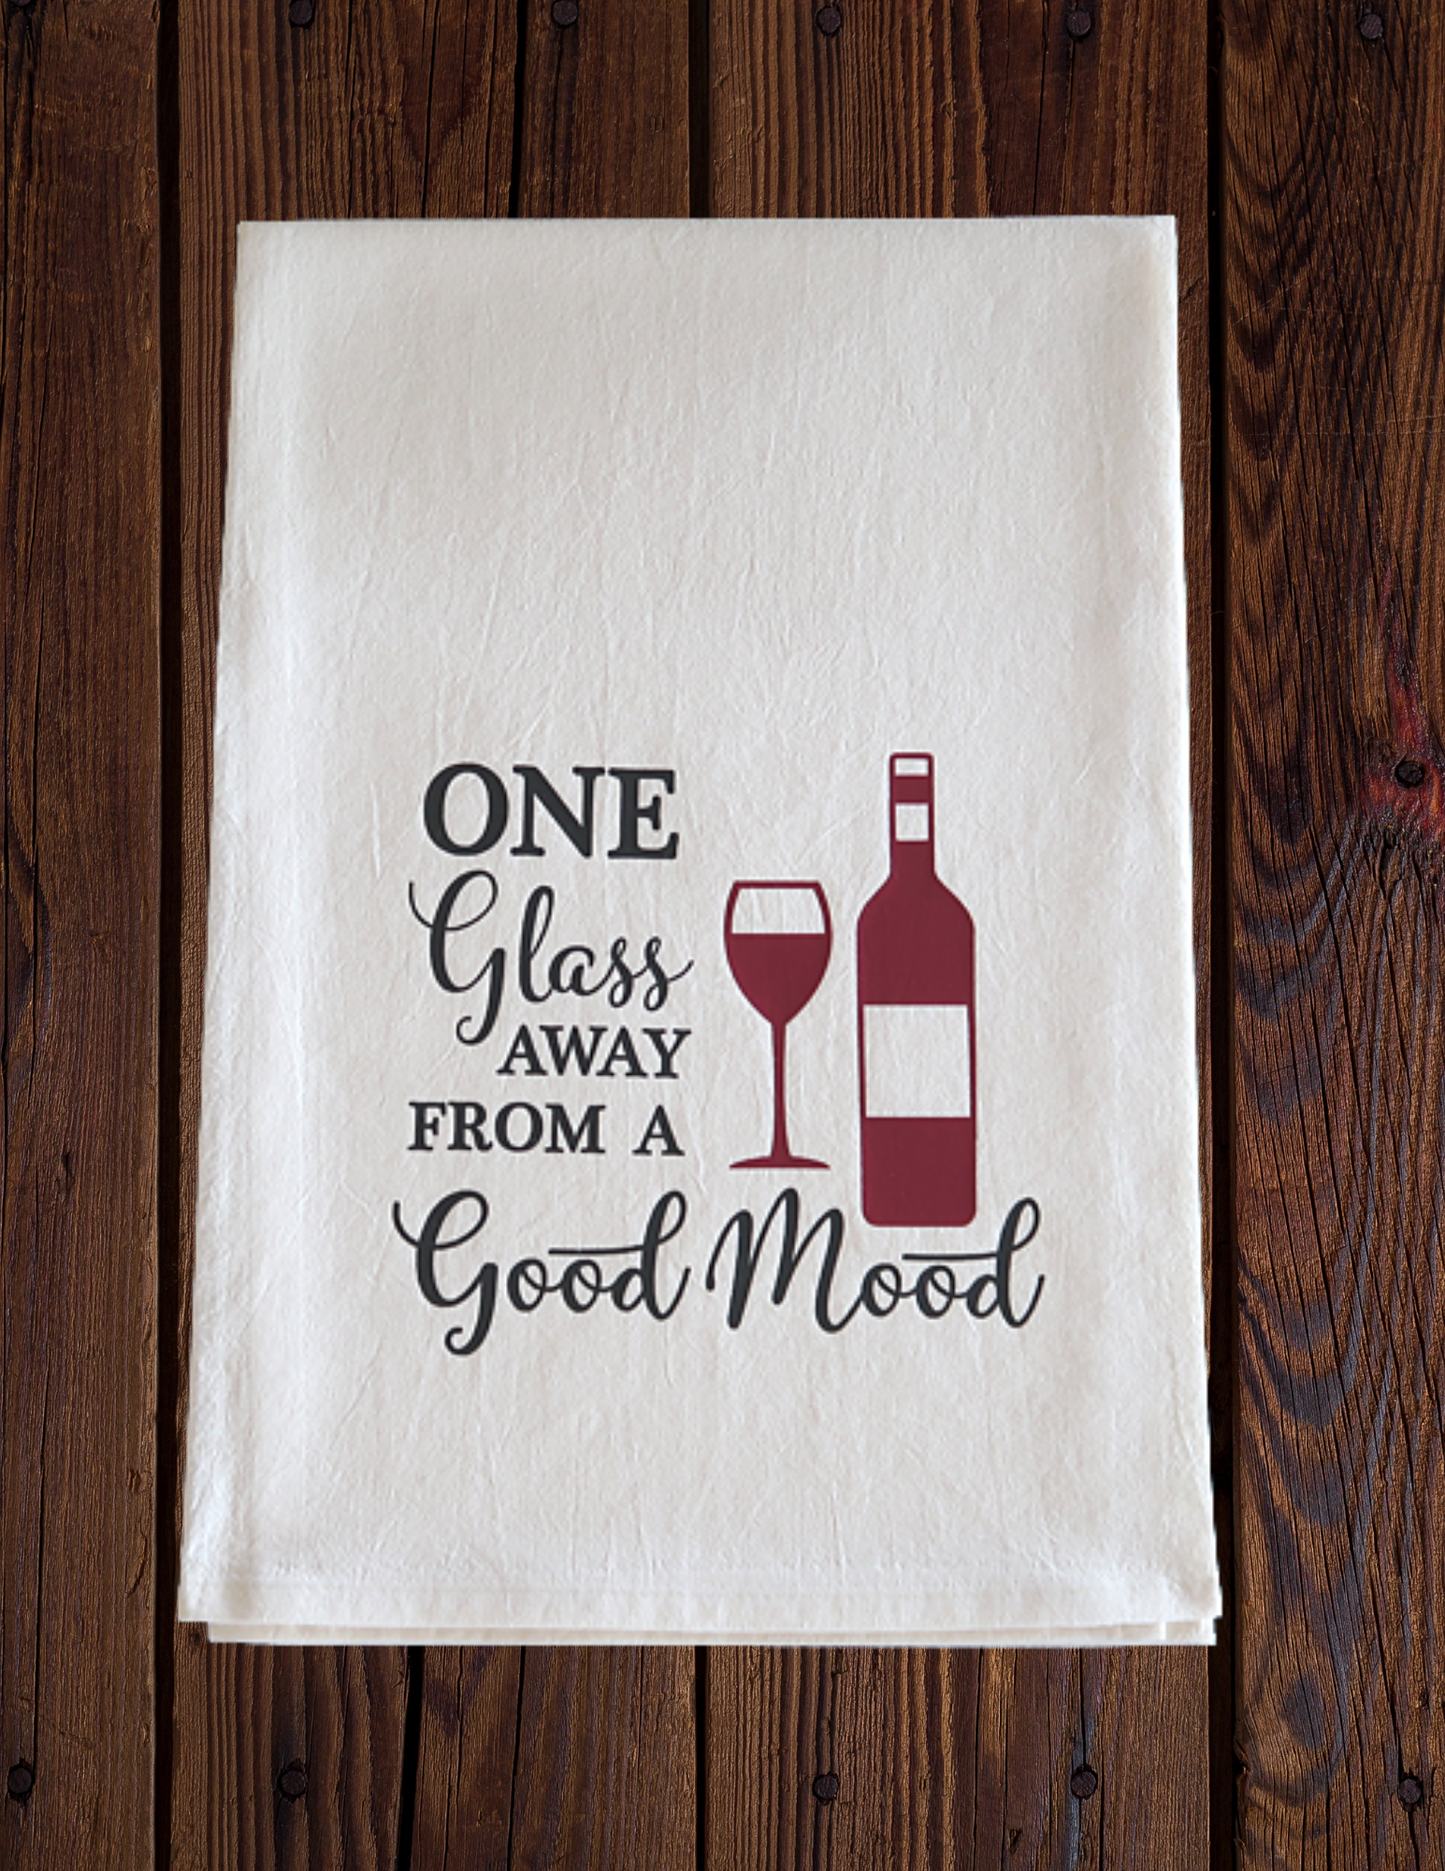 One Glass Away From a Good Mood - Tea Towel